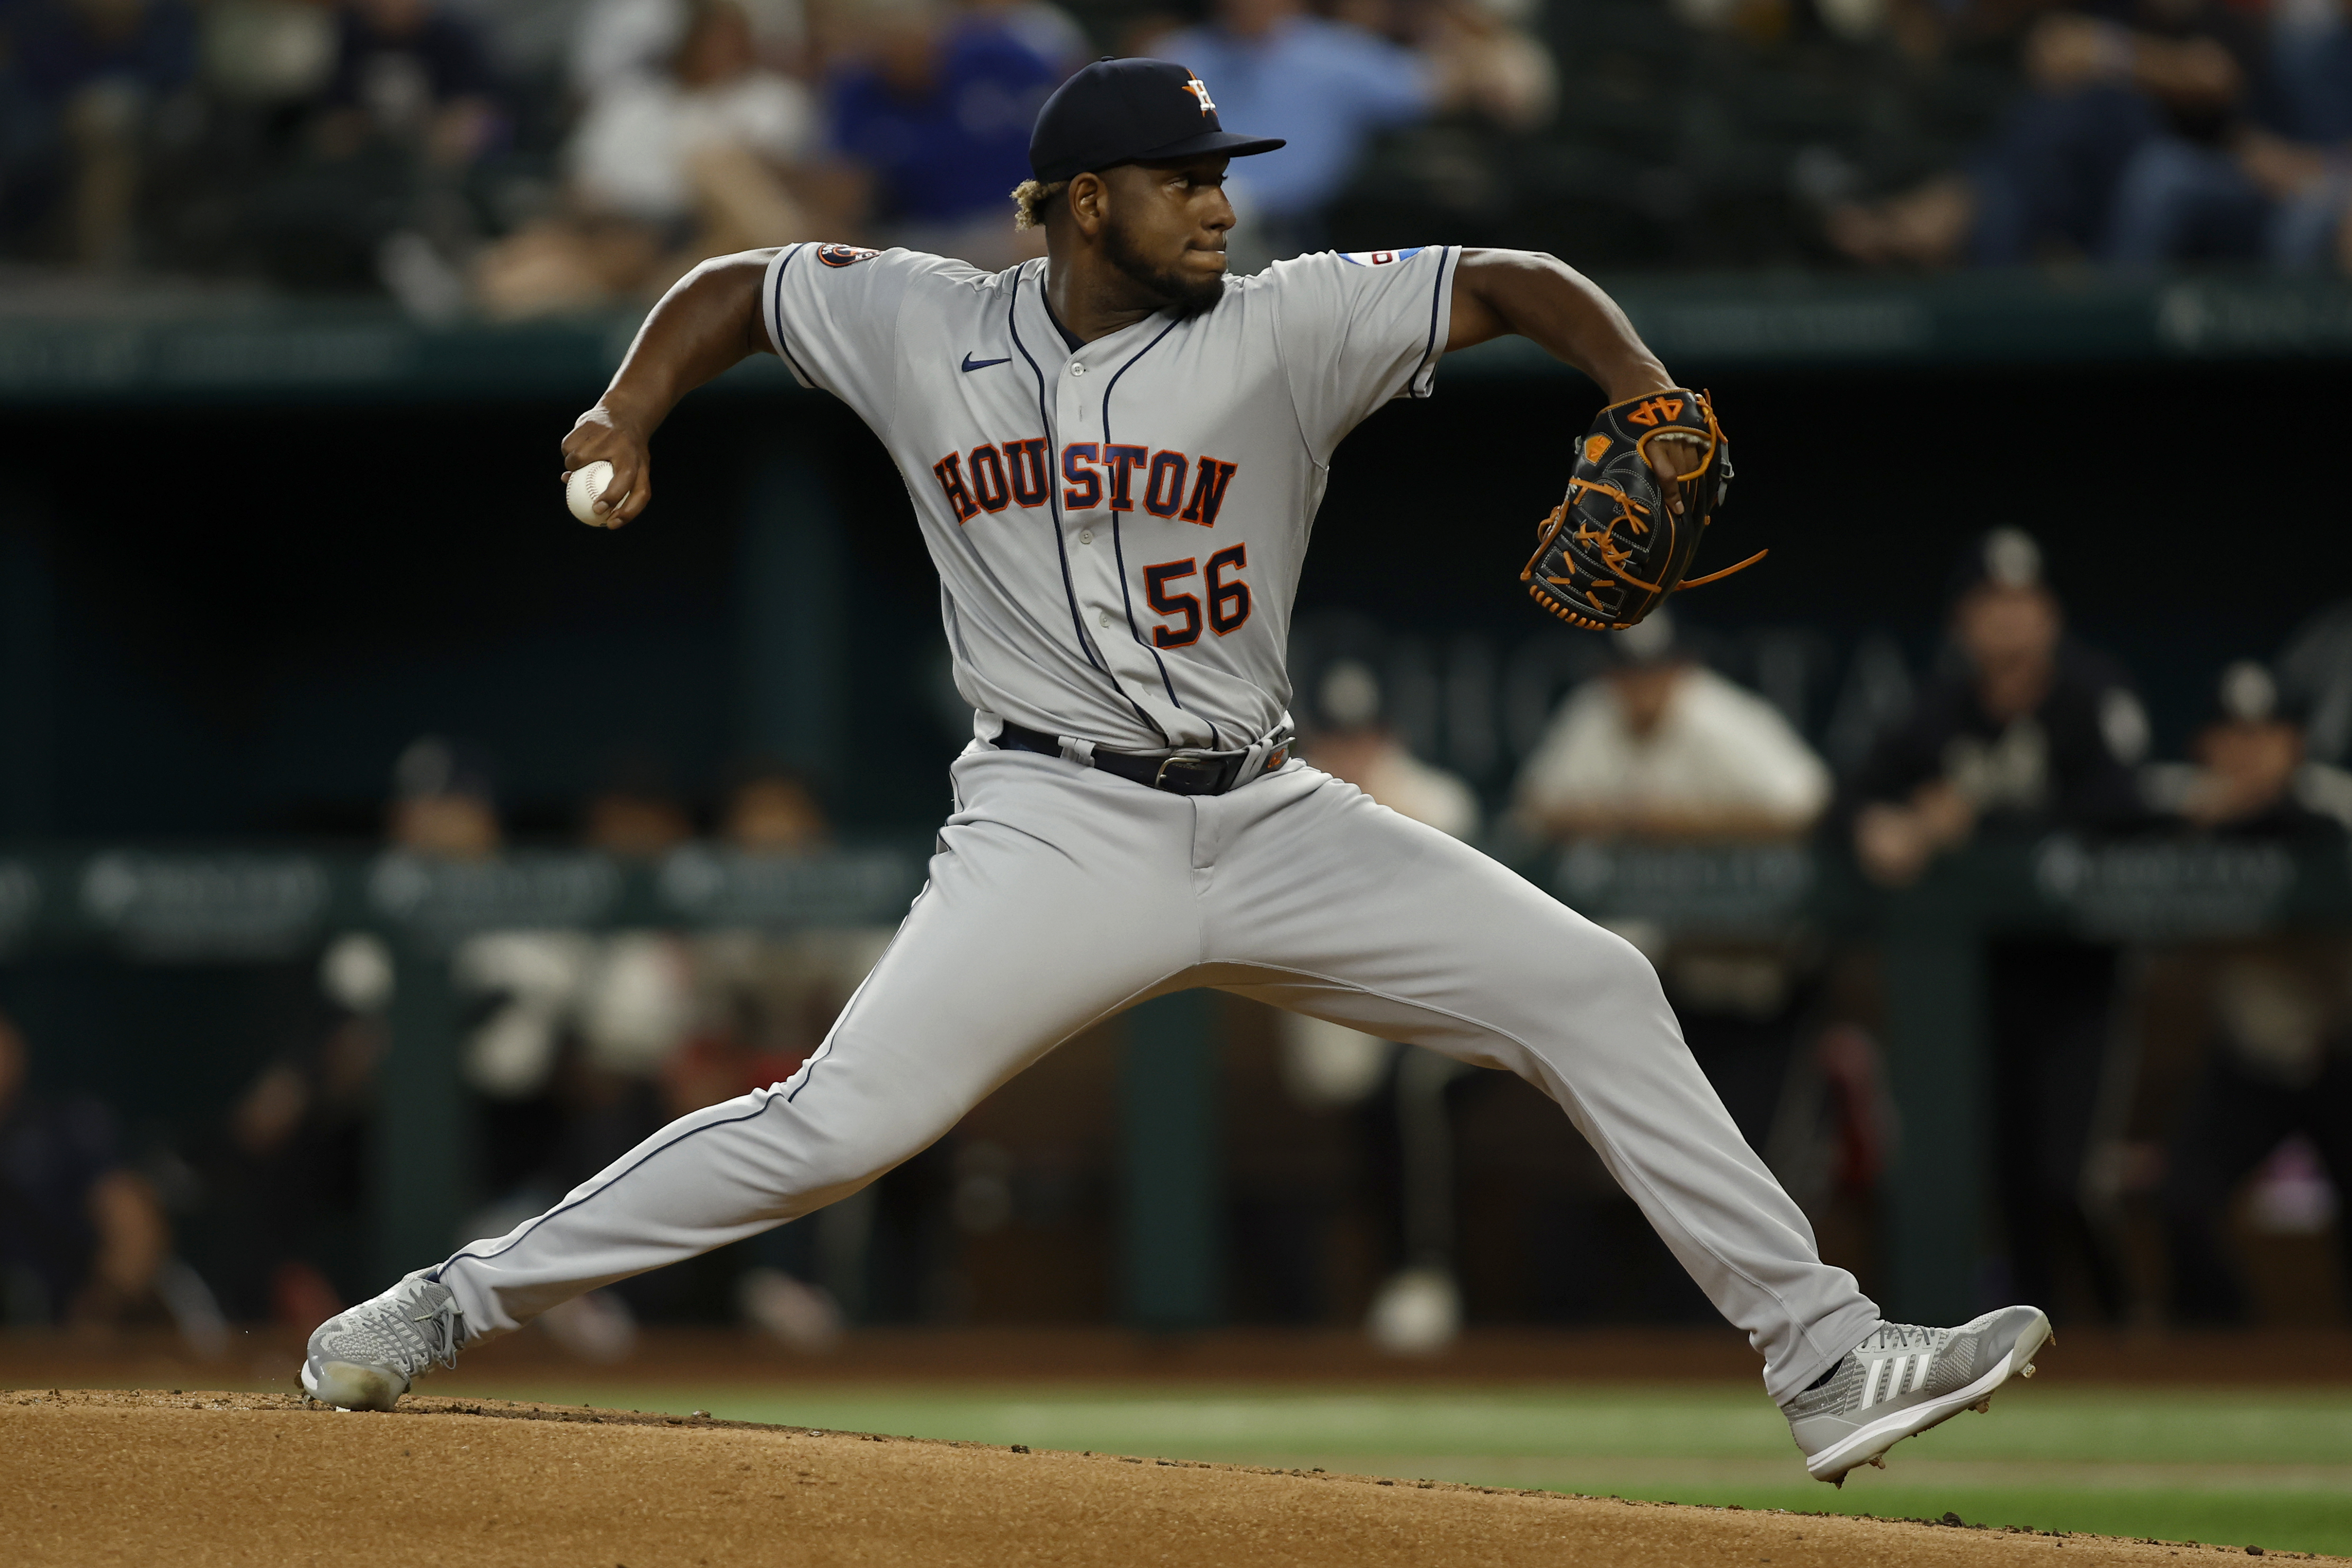 Sources: Houston Astros to recall pitcher Ronel Blanco